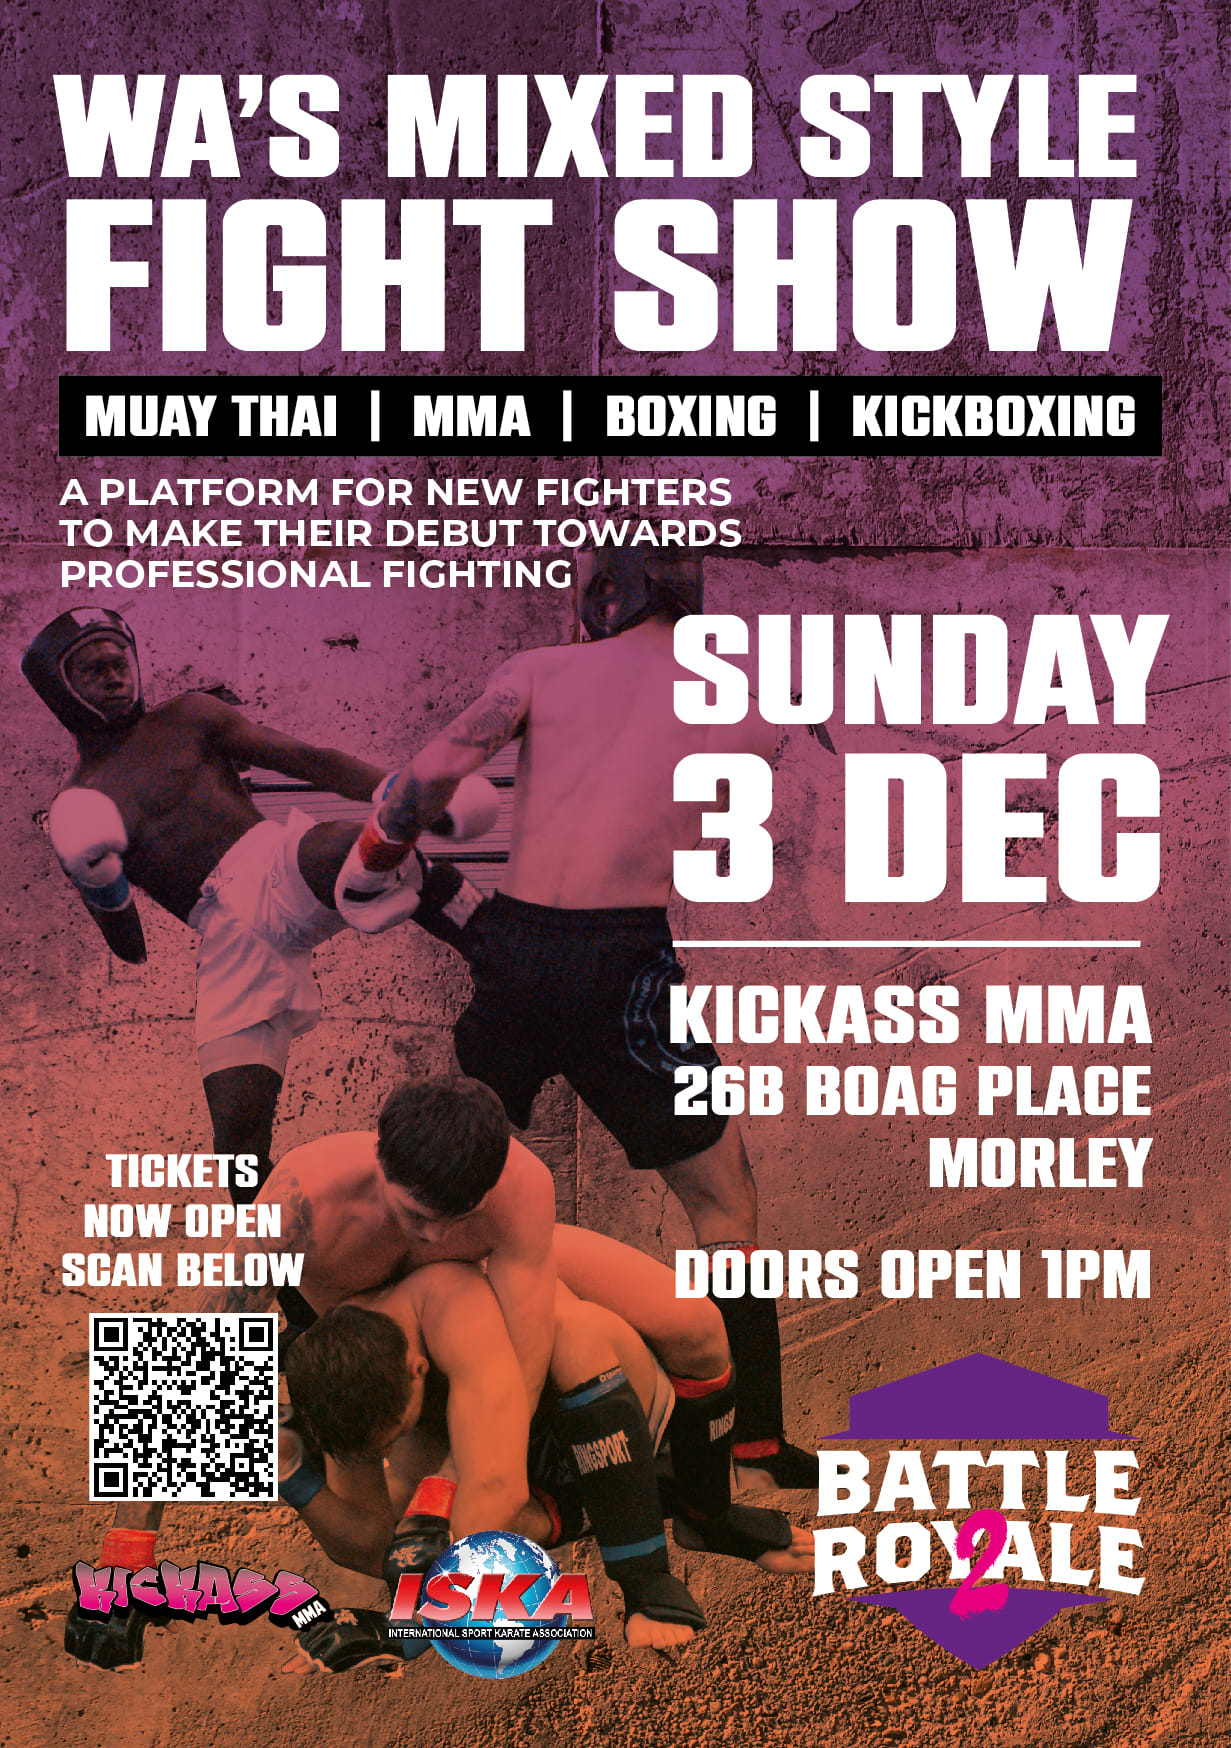 Poster advertising Fight Show Muay Thai, MMA, Boxing, kickboxing, with images of athletes